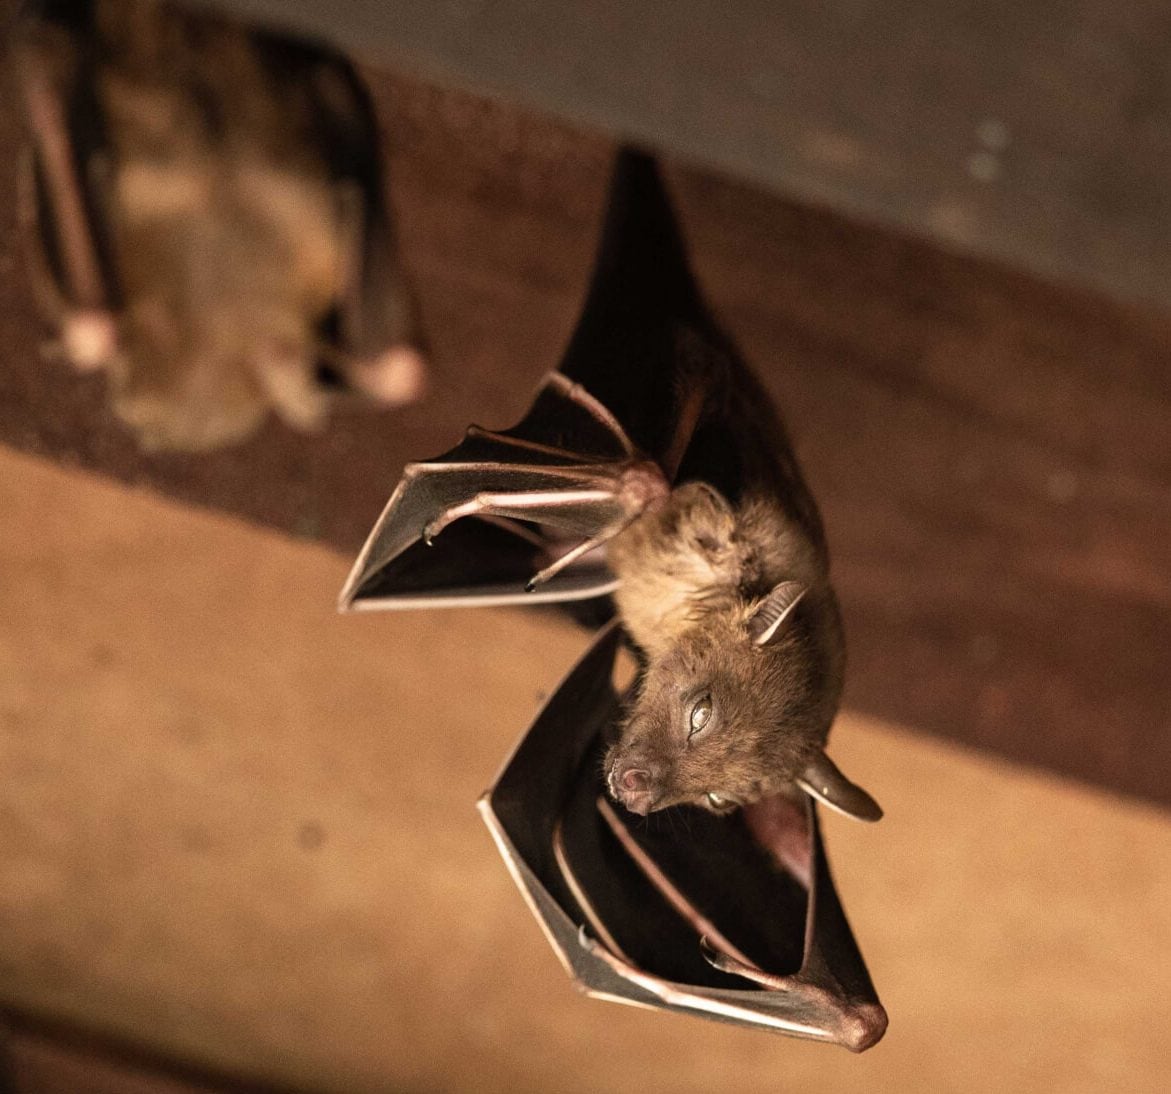 Expert bat removal services for a safe and humane solution in Towson